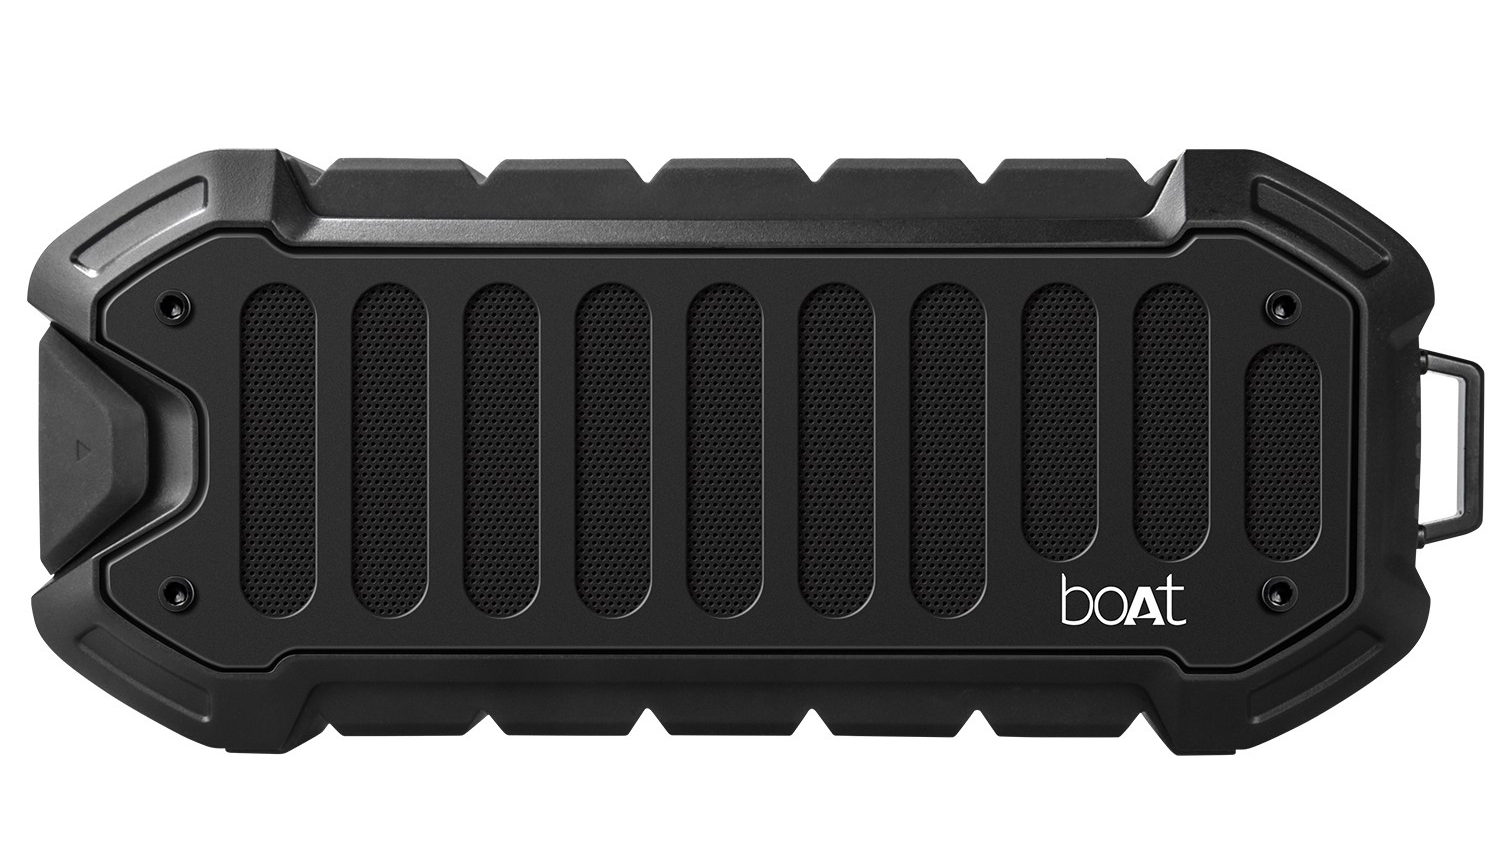 boAt Launches It’s First Alexa Speaker, The boAt Stone 700A